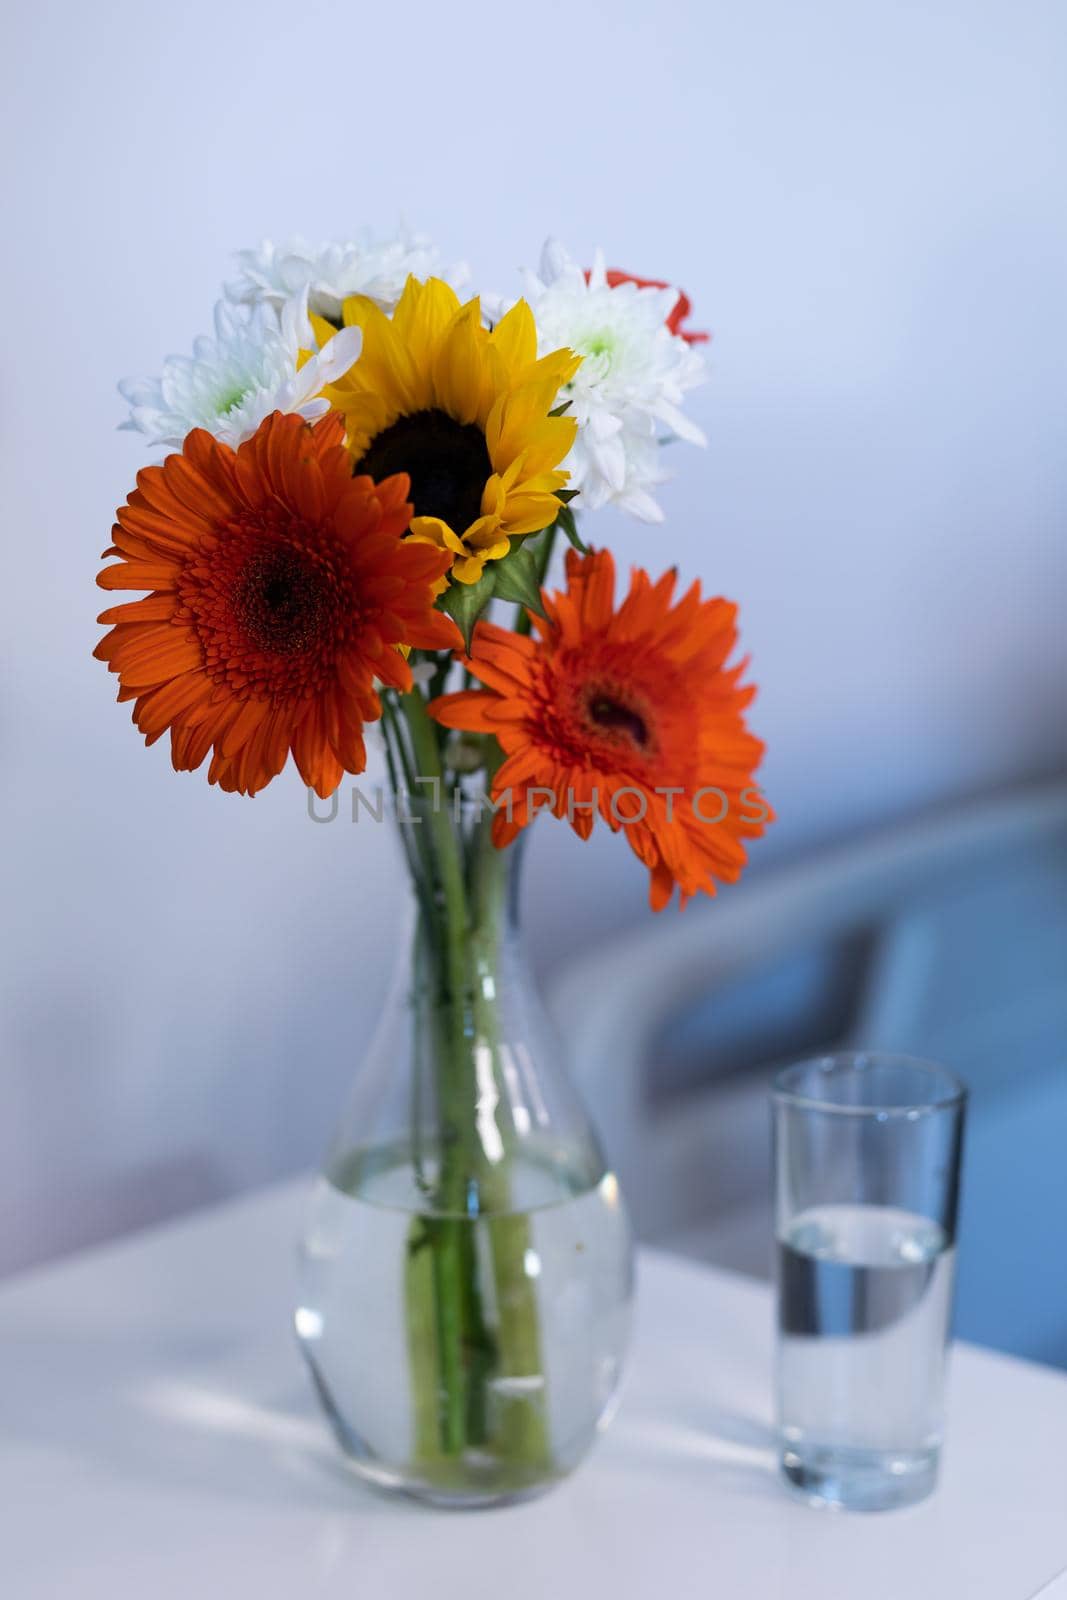 Colourful gerbera flowers in a vase, and a glass of water on a hospital patient's bedside table by Wavebreakmedia